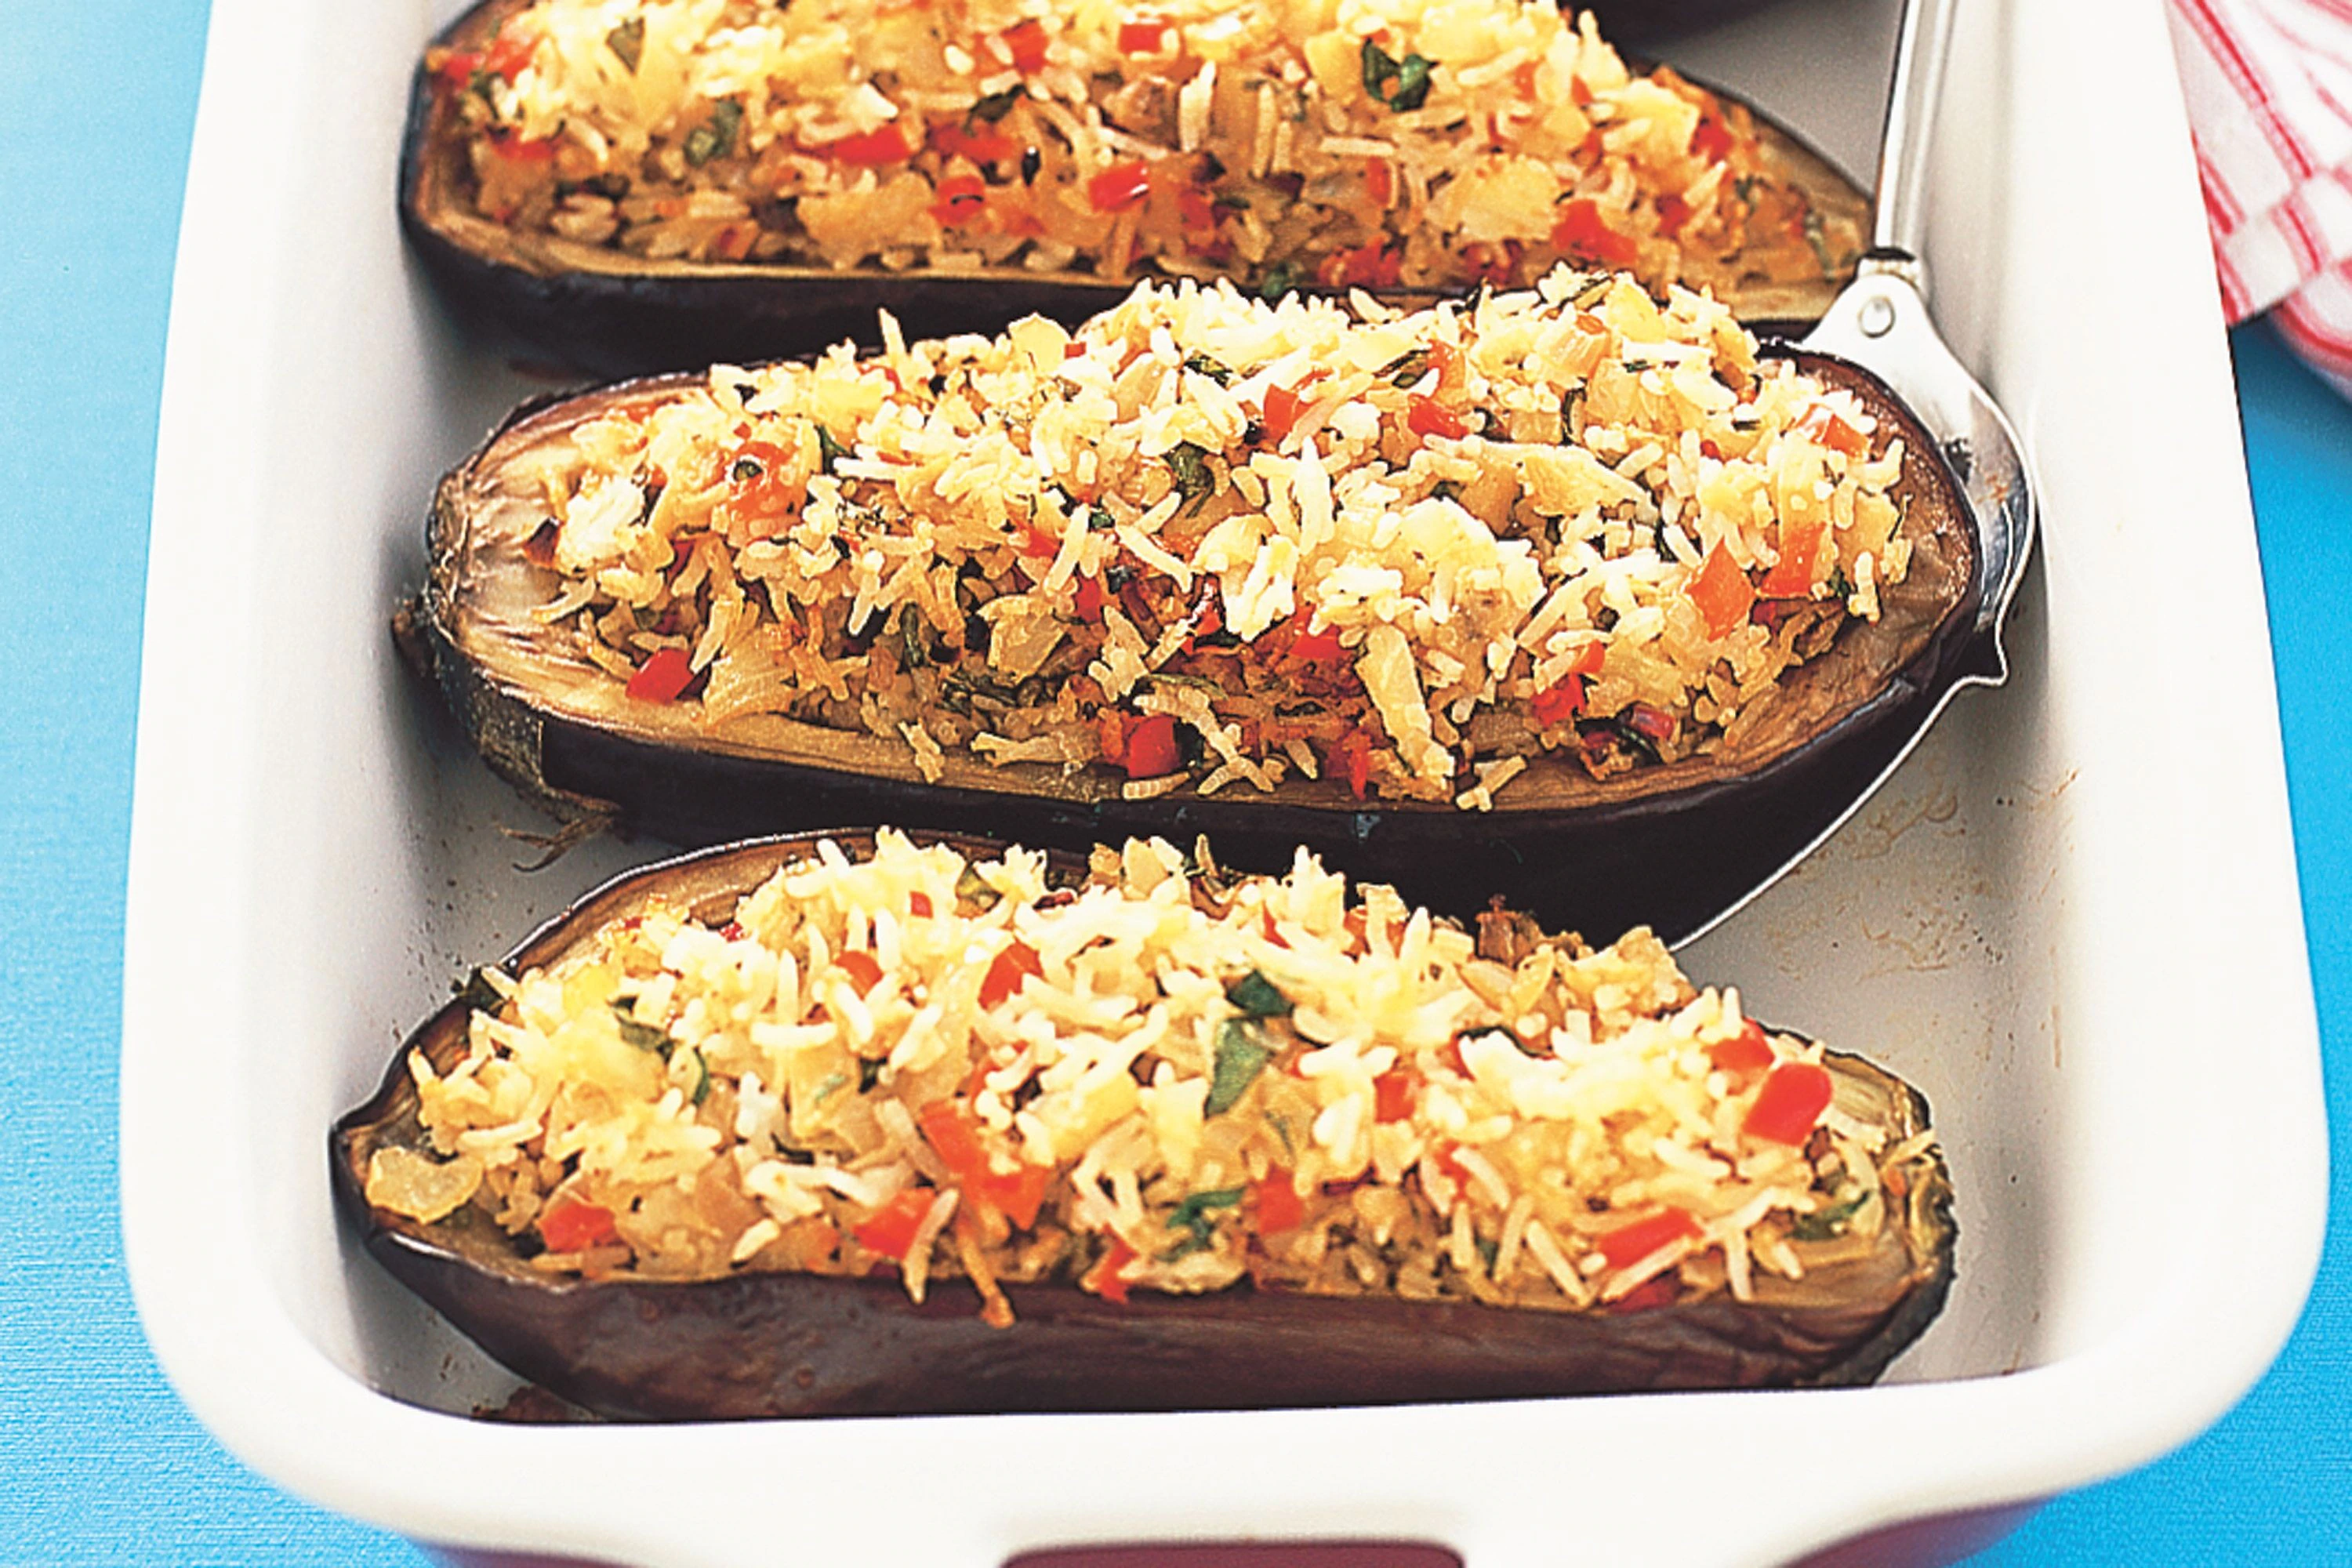 Spicy rice-filled eggplant